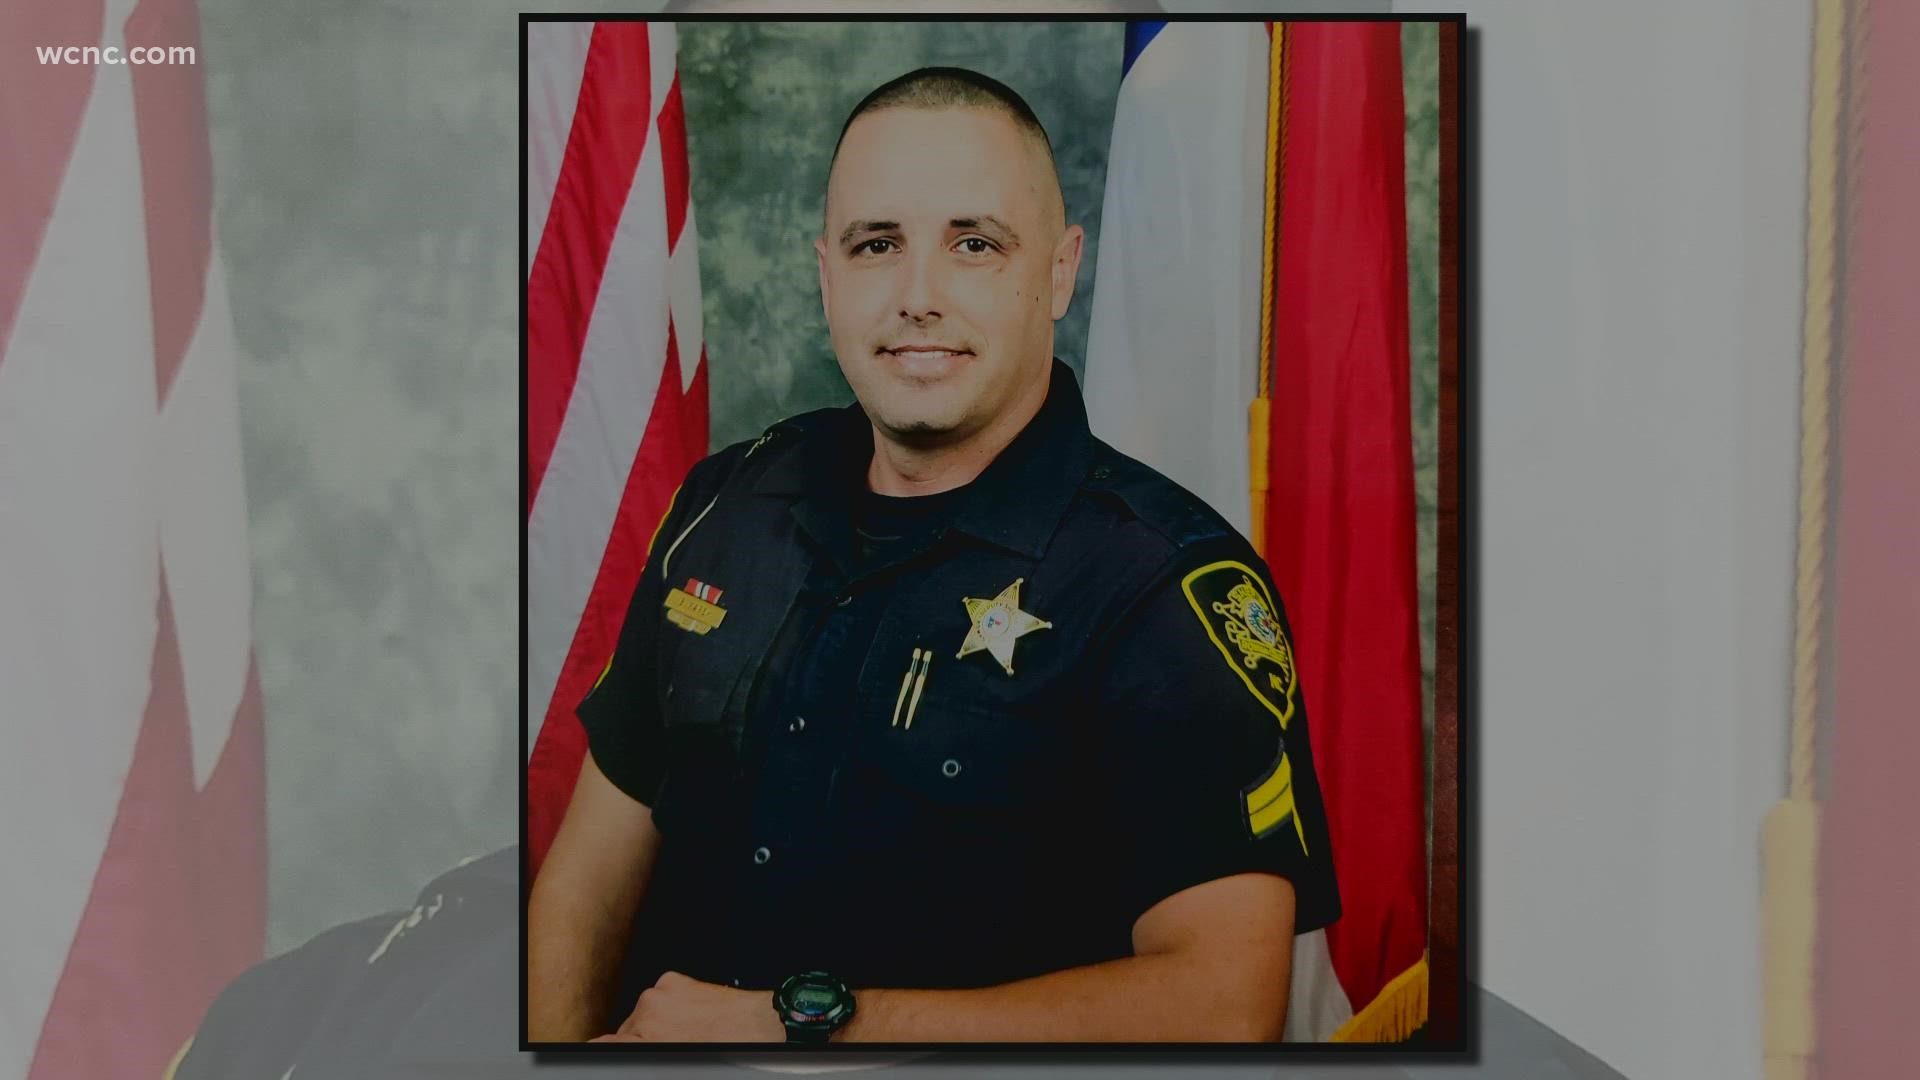 The Rowan County community is mourning the loss of a sheriff's deputy. Master Deputy William “Billy” Marsh died on Sunday after a battle with COVID-19.